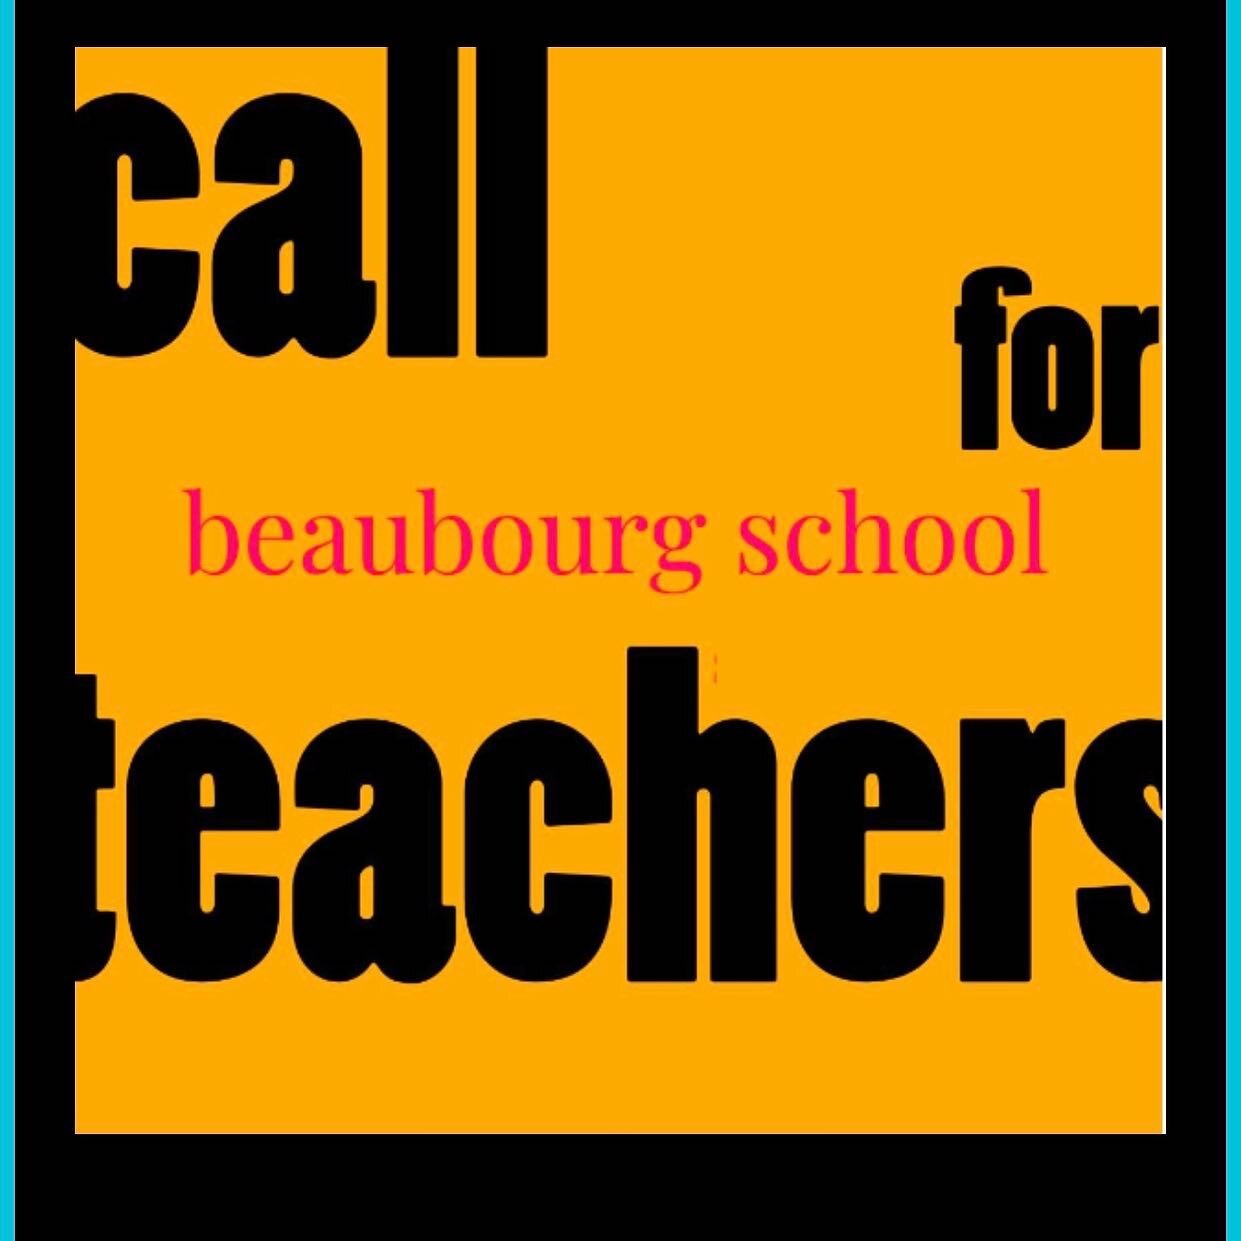 Here ye, here ye!!!! The doors of the Beaubourg School fall semester are open! 

This #fall the Beaubourg School is hosting another semester of #free #classes to foster community in New Orleans. And we want #YOU to come in and #teach. 

Here&rsquo;s 